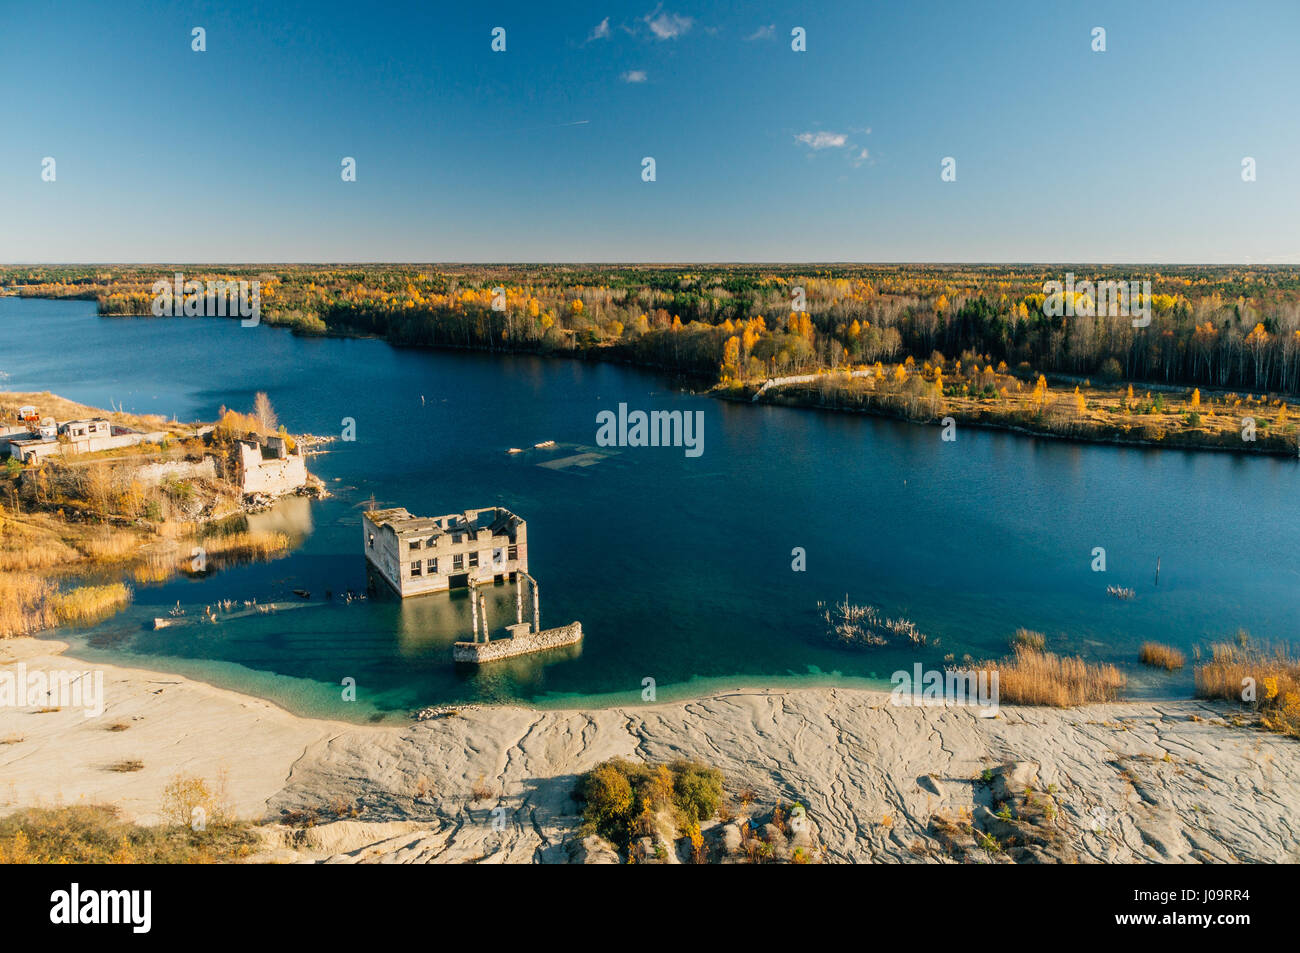 Abandoned Rummu quarry from above view. Autumn landscape by sunset. Harjumaa, Estonia. Stock Photo